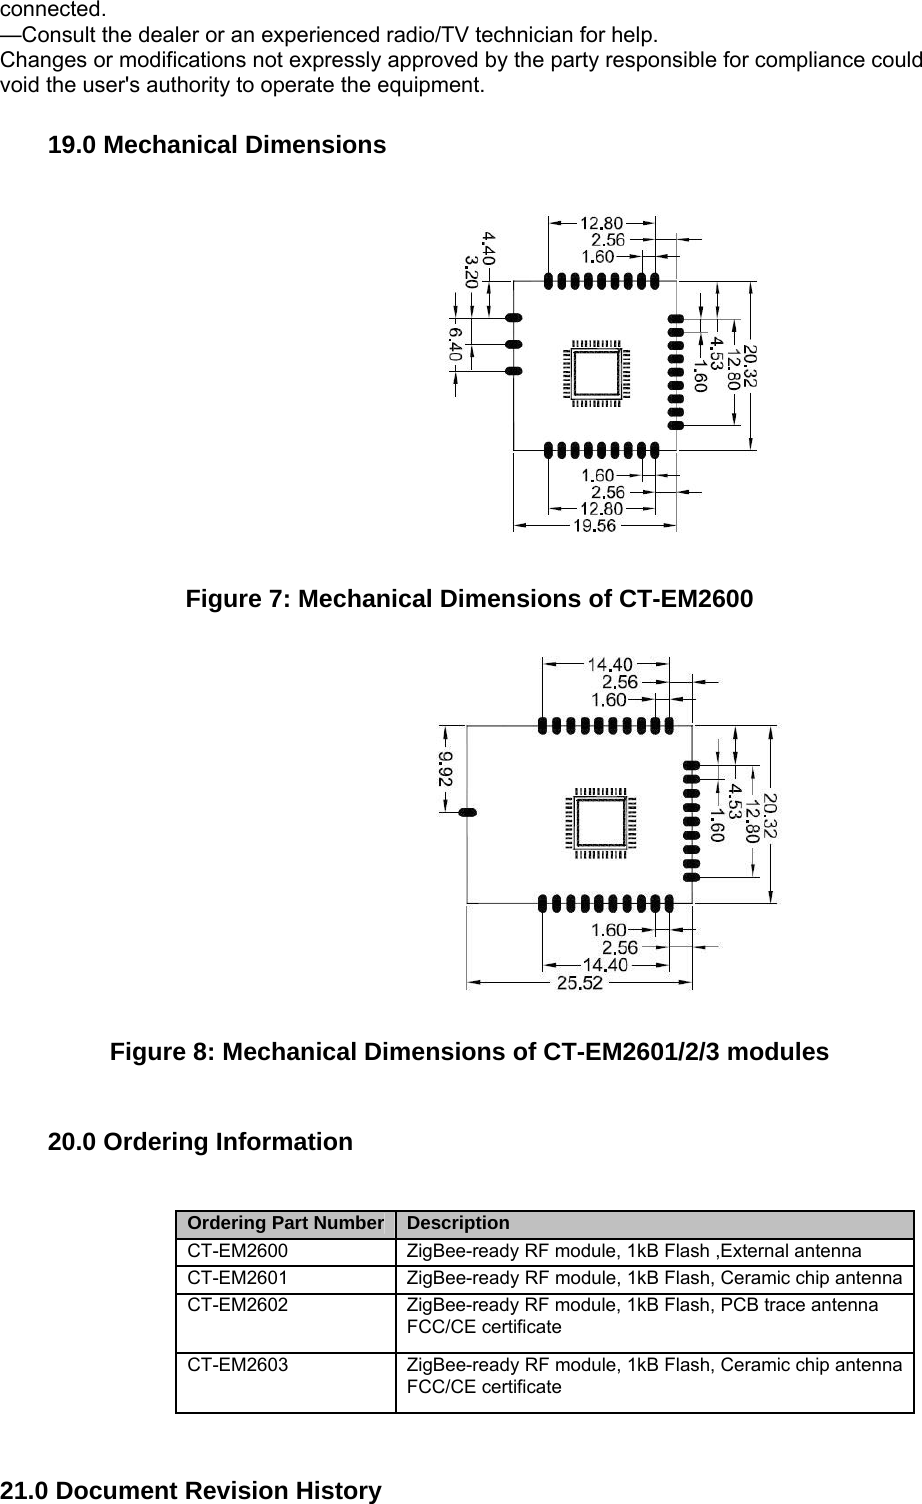 connected.  —Consult the dealer or an experienced radio/TV technician for help.   Changes or modifications not expressly approved by the party responsible for compliance could void the user&apos;s authority to operate the equipment.  19.0 Mechanical Dimensions      Figure 7: Mechanical Dimensions of CT-EM2600       Figure 8: Mechanical Dimensions of CT-EM2601/2/3 modules      20.0 Ordering Information    Ordering Part Number    Description   CT-EM2600   ZigBee-ready RF module, 1kB Flash ,External antenna   CT-EM2601    ZigBee-ready RF module, 1kB Flash, Ceramic chip antenna CT-EM2602   ZigBee-ready RF module, 1kB Flash, PCB trace antenna   FCC/CE certificate   CT-EM2603    ZigBee-ready RF module, 1kB Flash, Ceramic chip antenna FCC/CE certificate     21.0 Document Revision History    